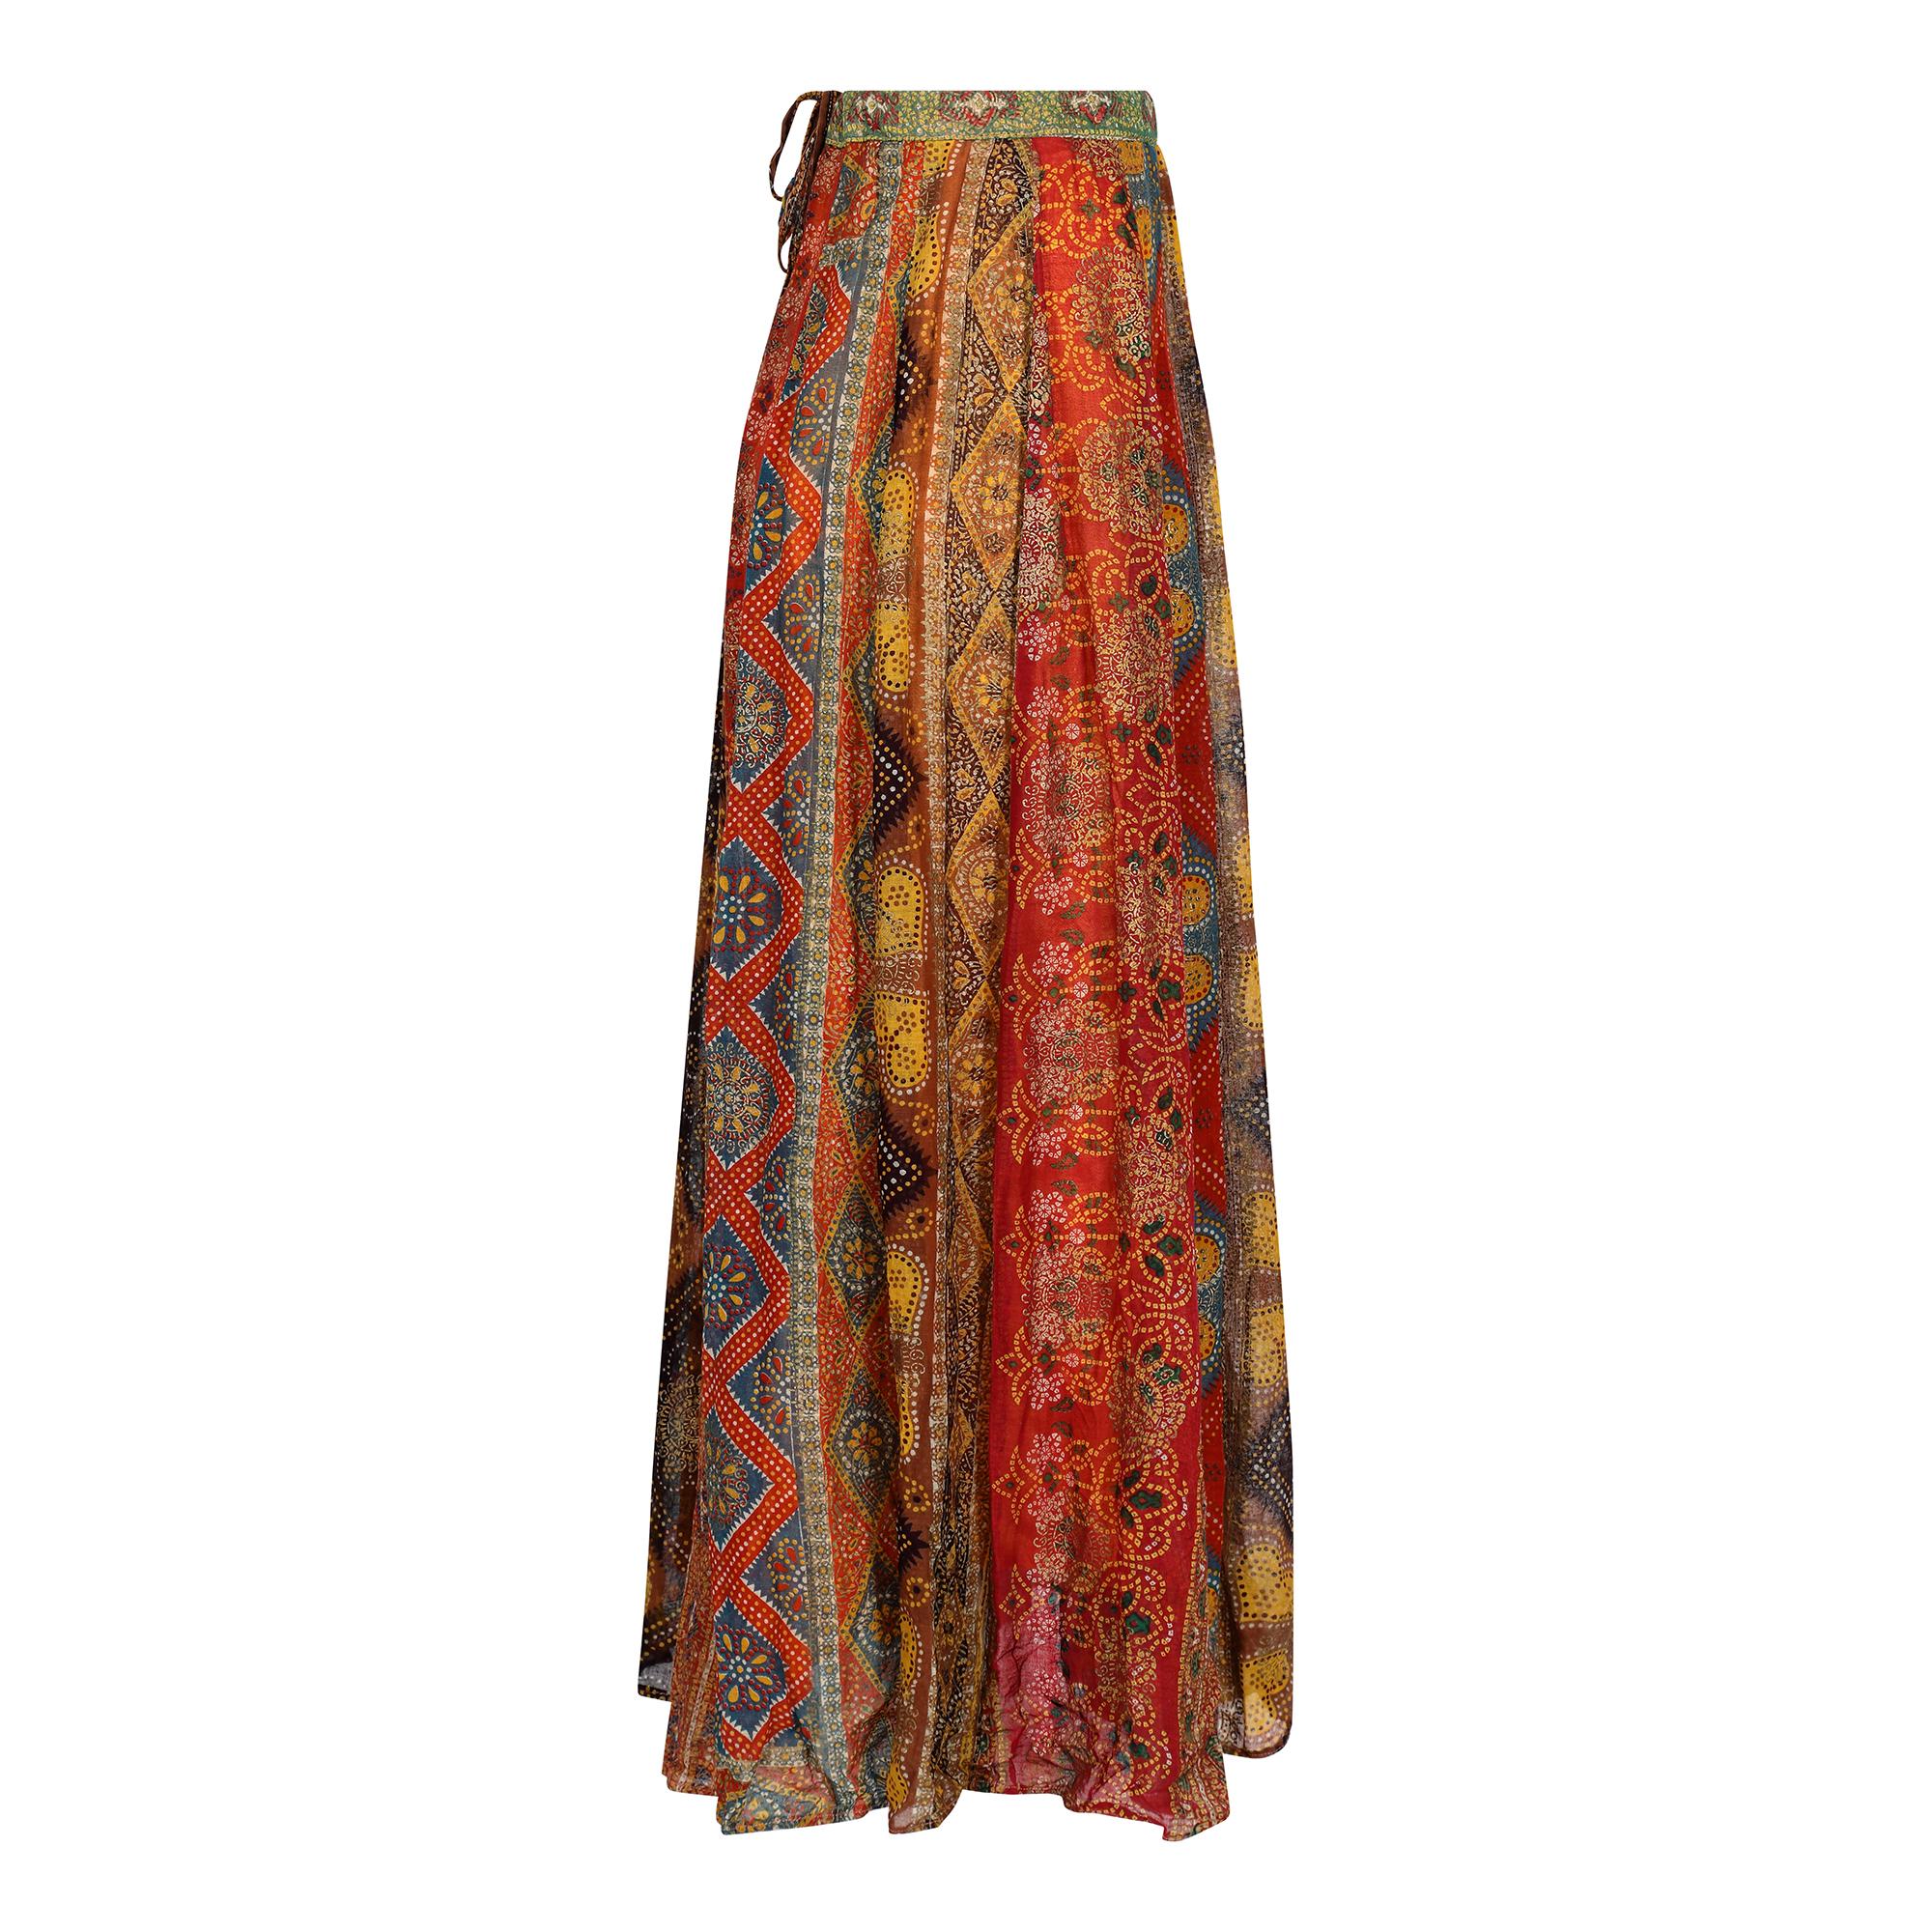 Original late 1960s or early 1970s hand painted block print Indian skirt in pristine vintage condition. This is an authentic and sort after original example of early boho or hippie fashion which has been carefully stored for nearly 50 years. The